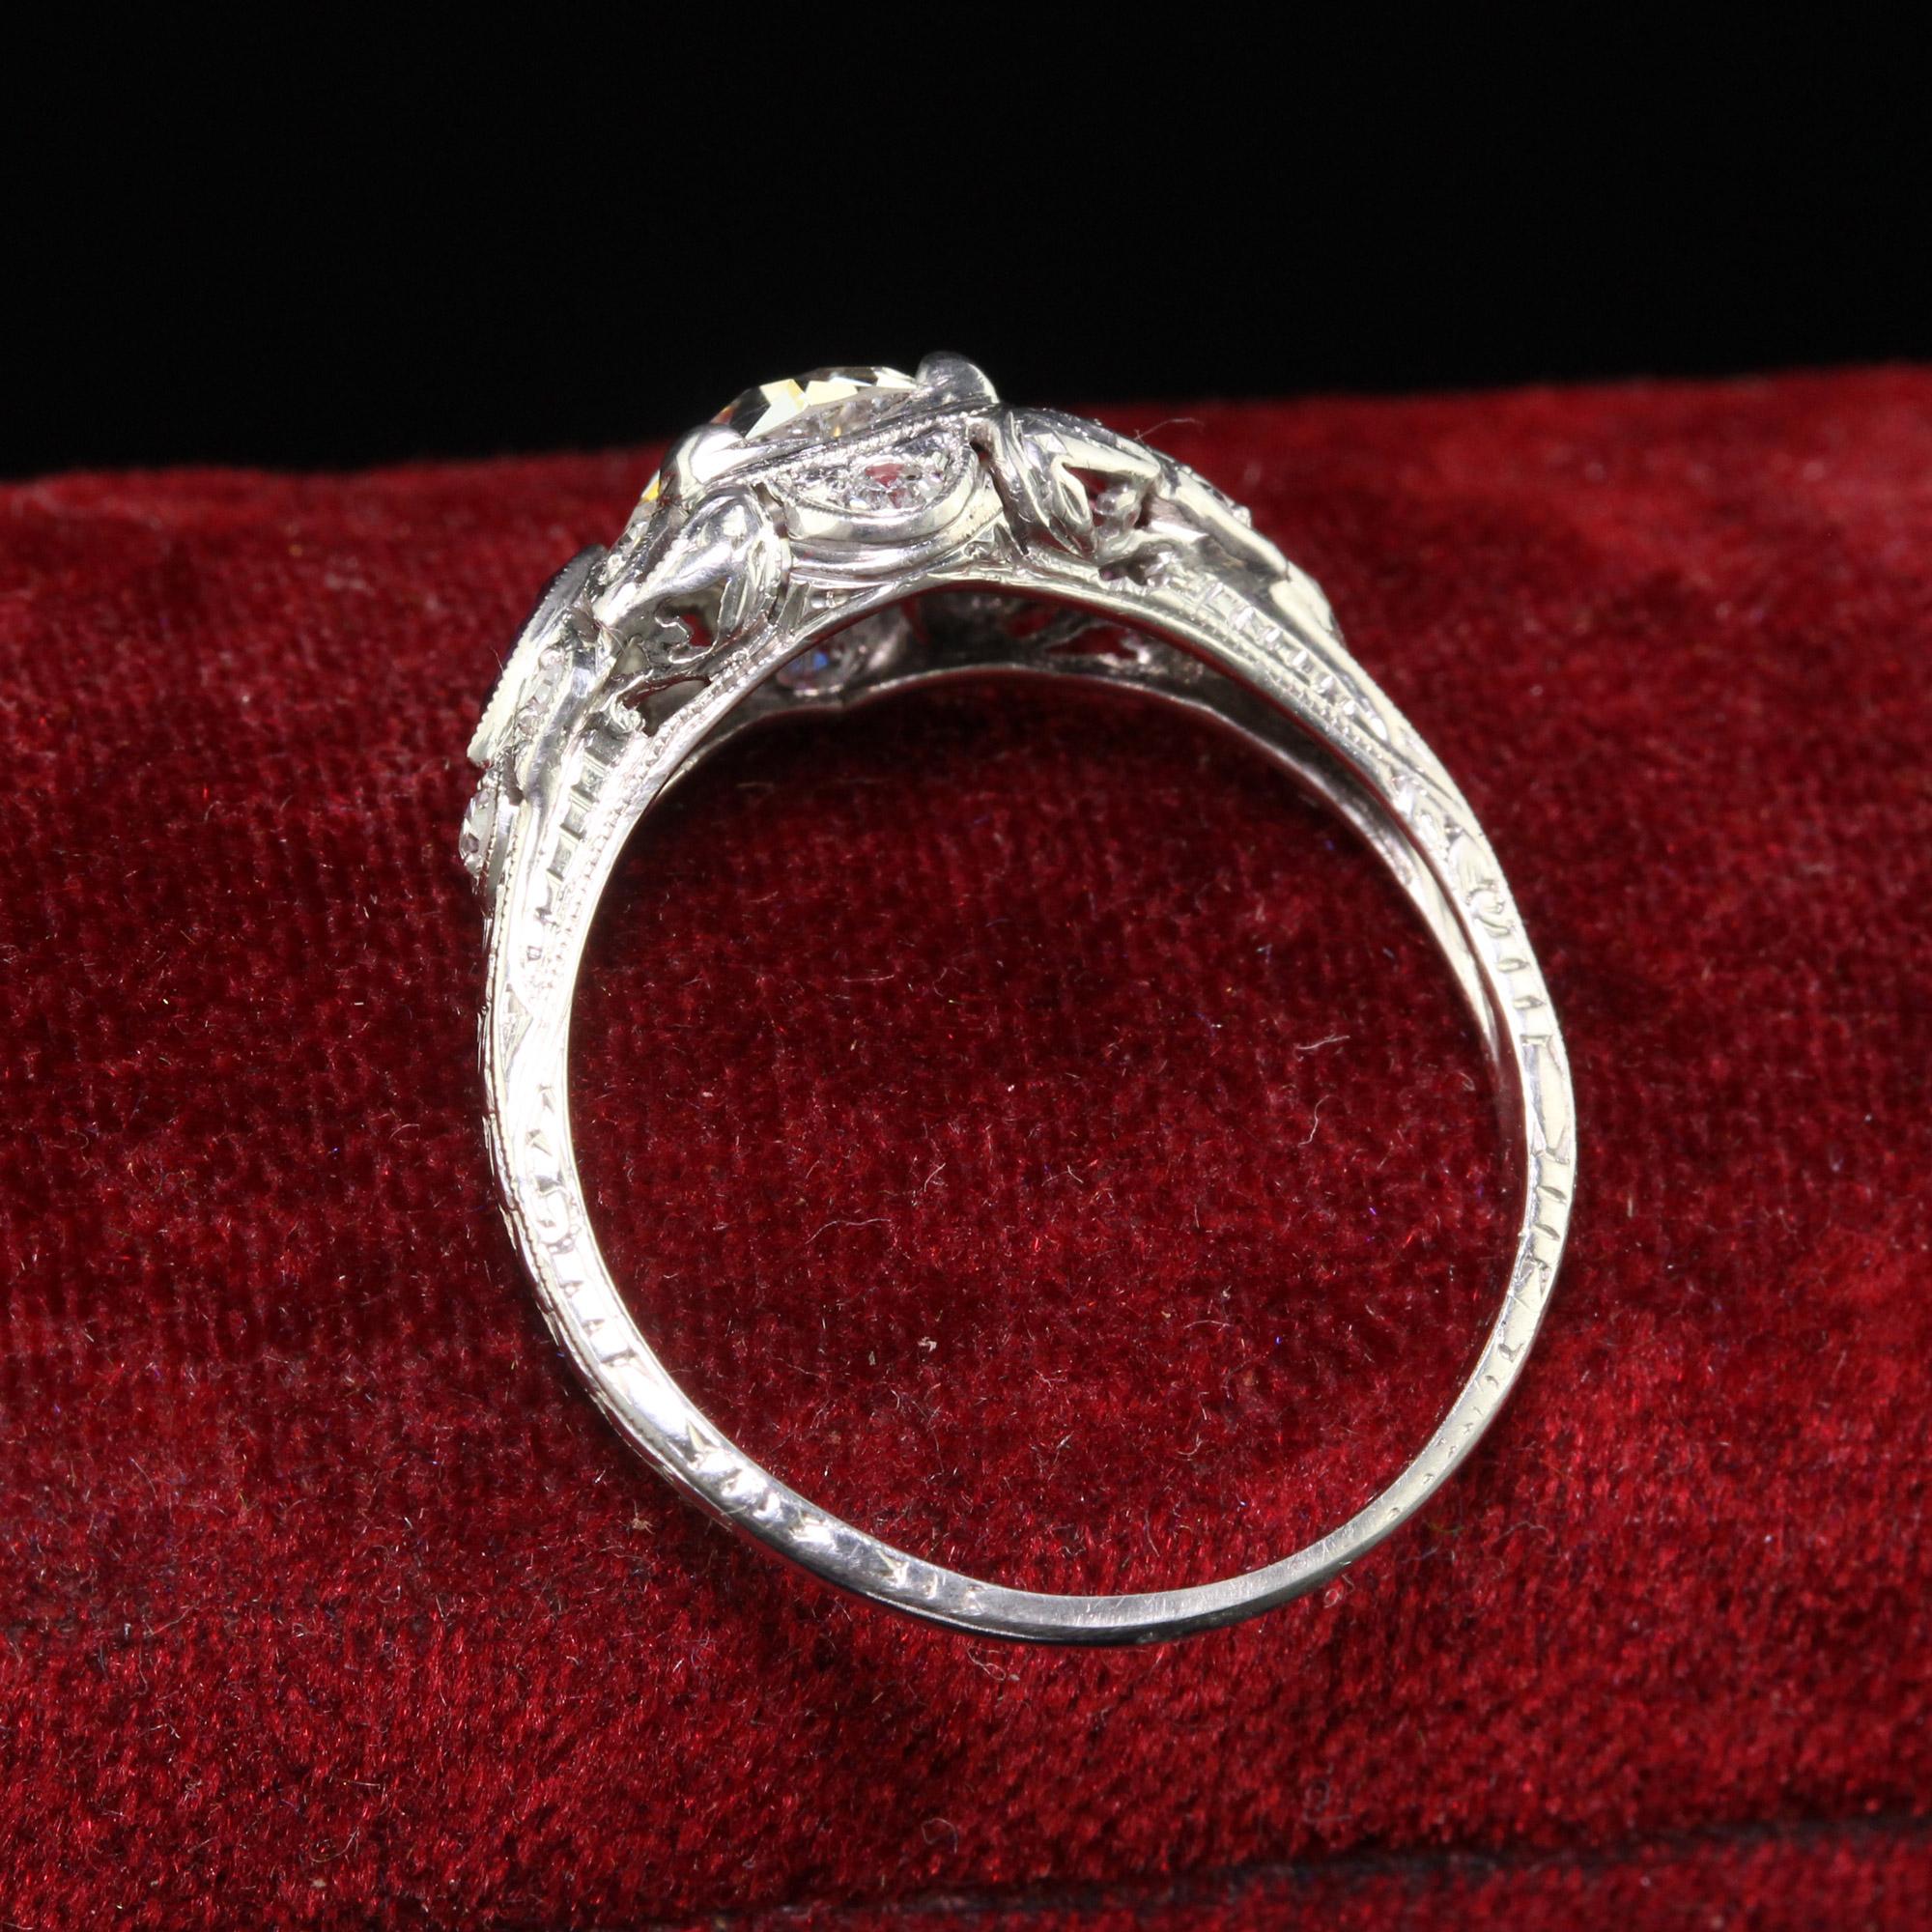 Antique Art Deco Platinum Old European Diamond and Ruby Engagement Ring - GIA In Good Condition For Sale In Great Neck, NY